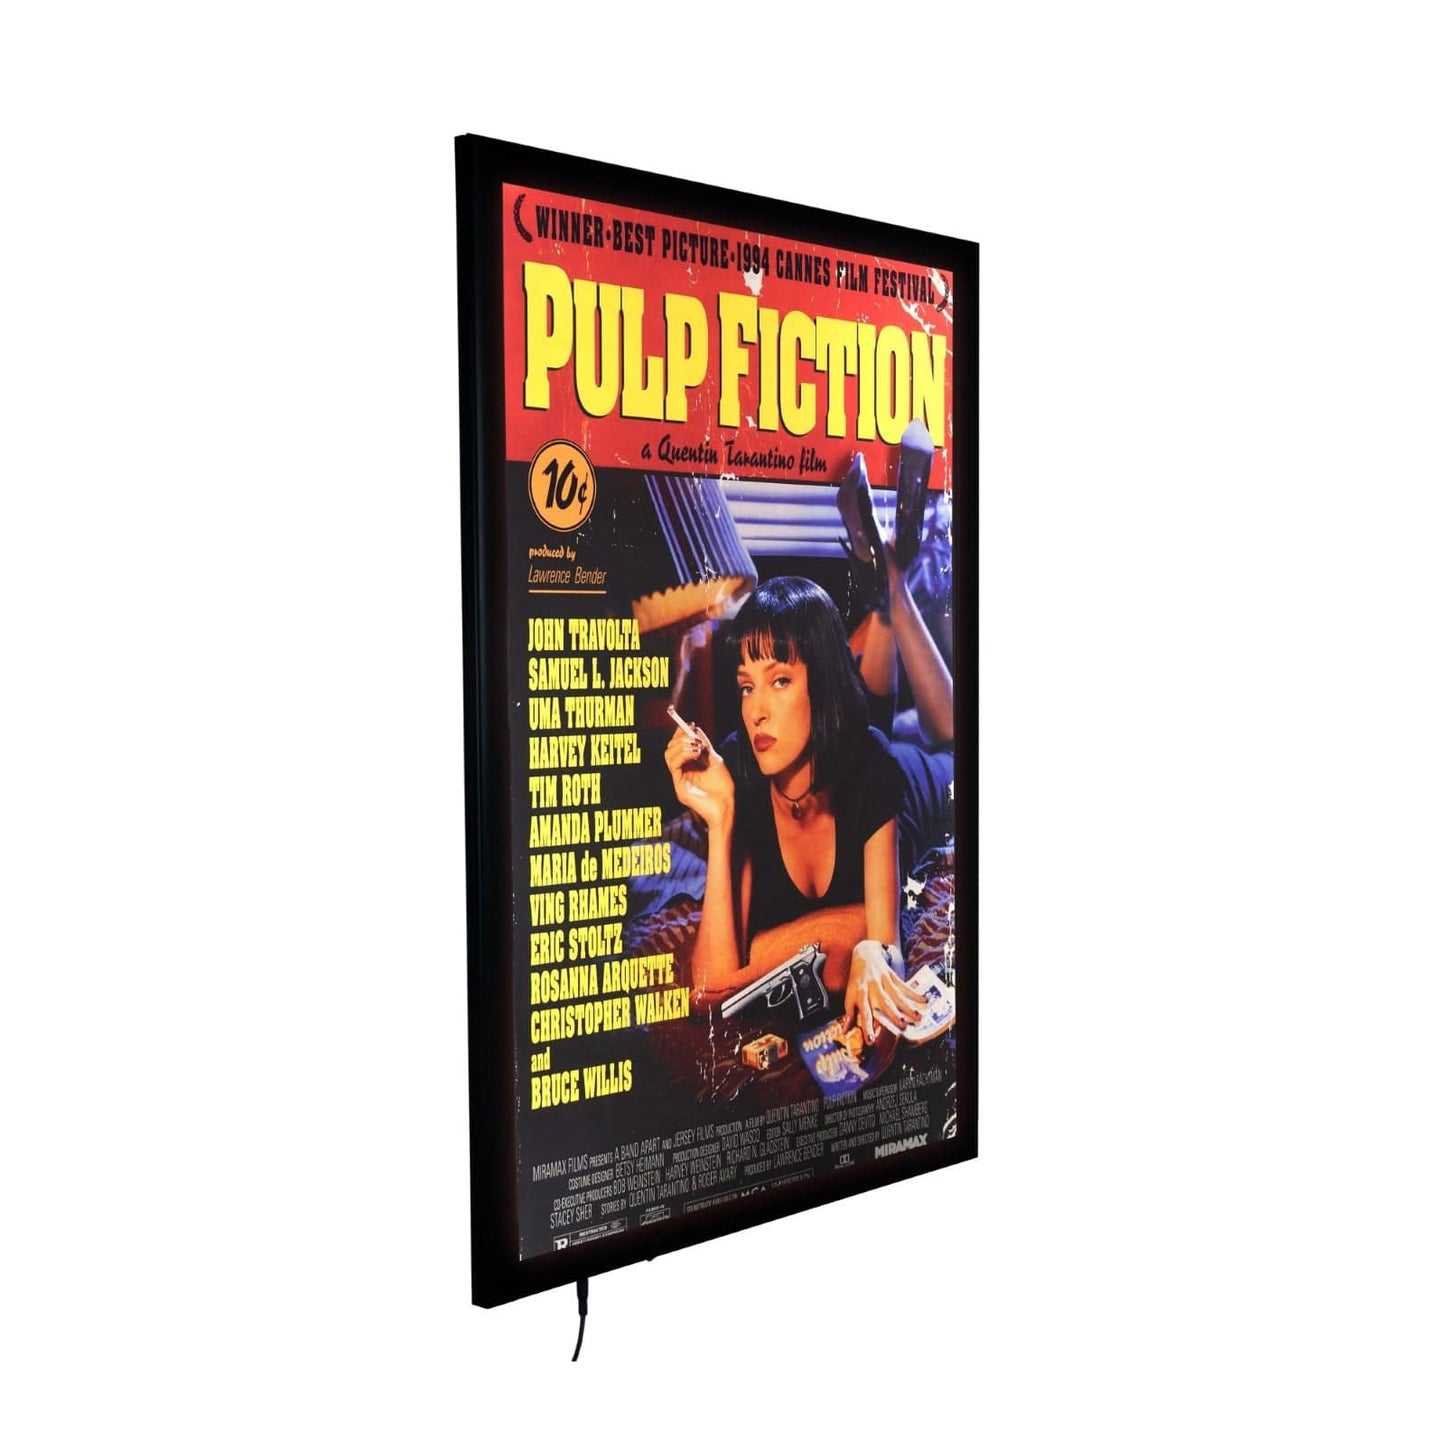 27x40 Inches Black SnapeZo® Glow LED Home Theater Frame - 1.38" Profile - Snap Frames Direct